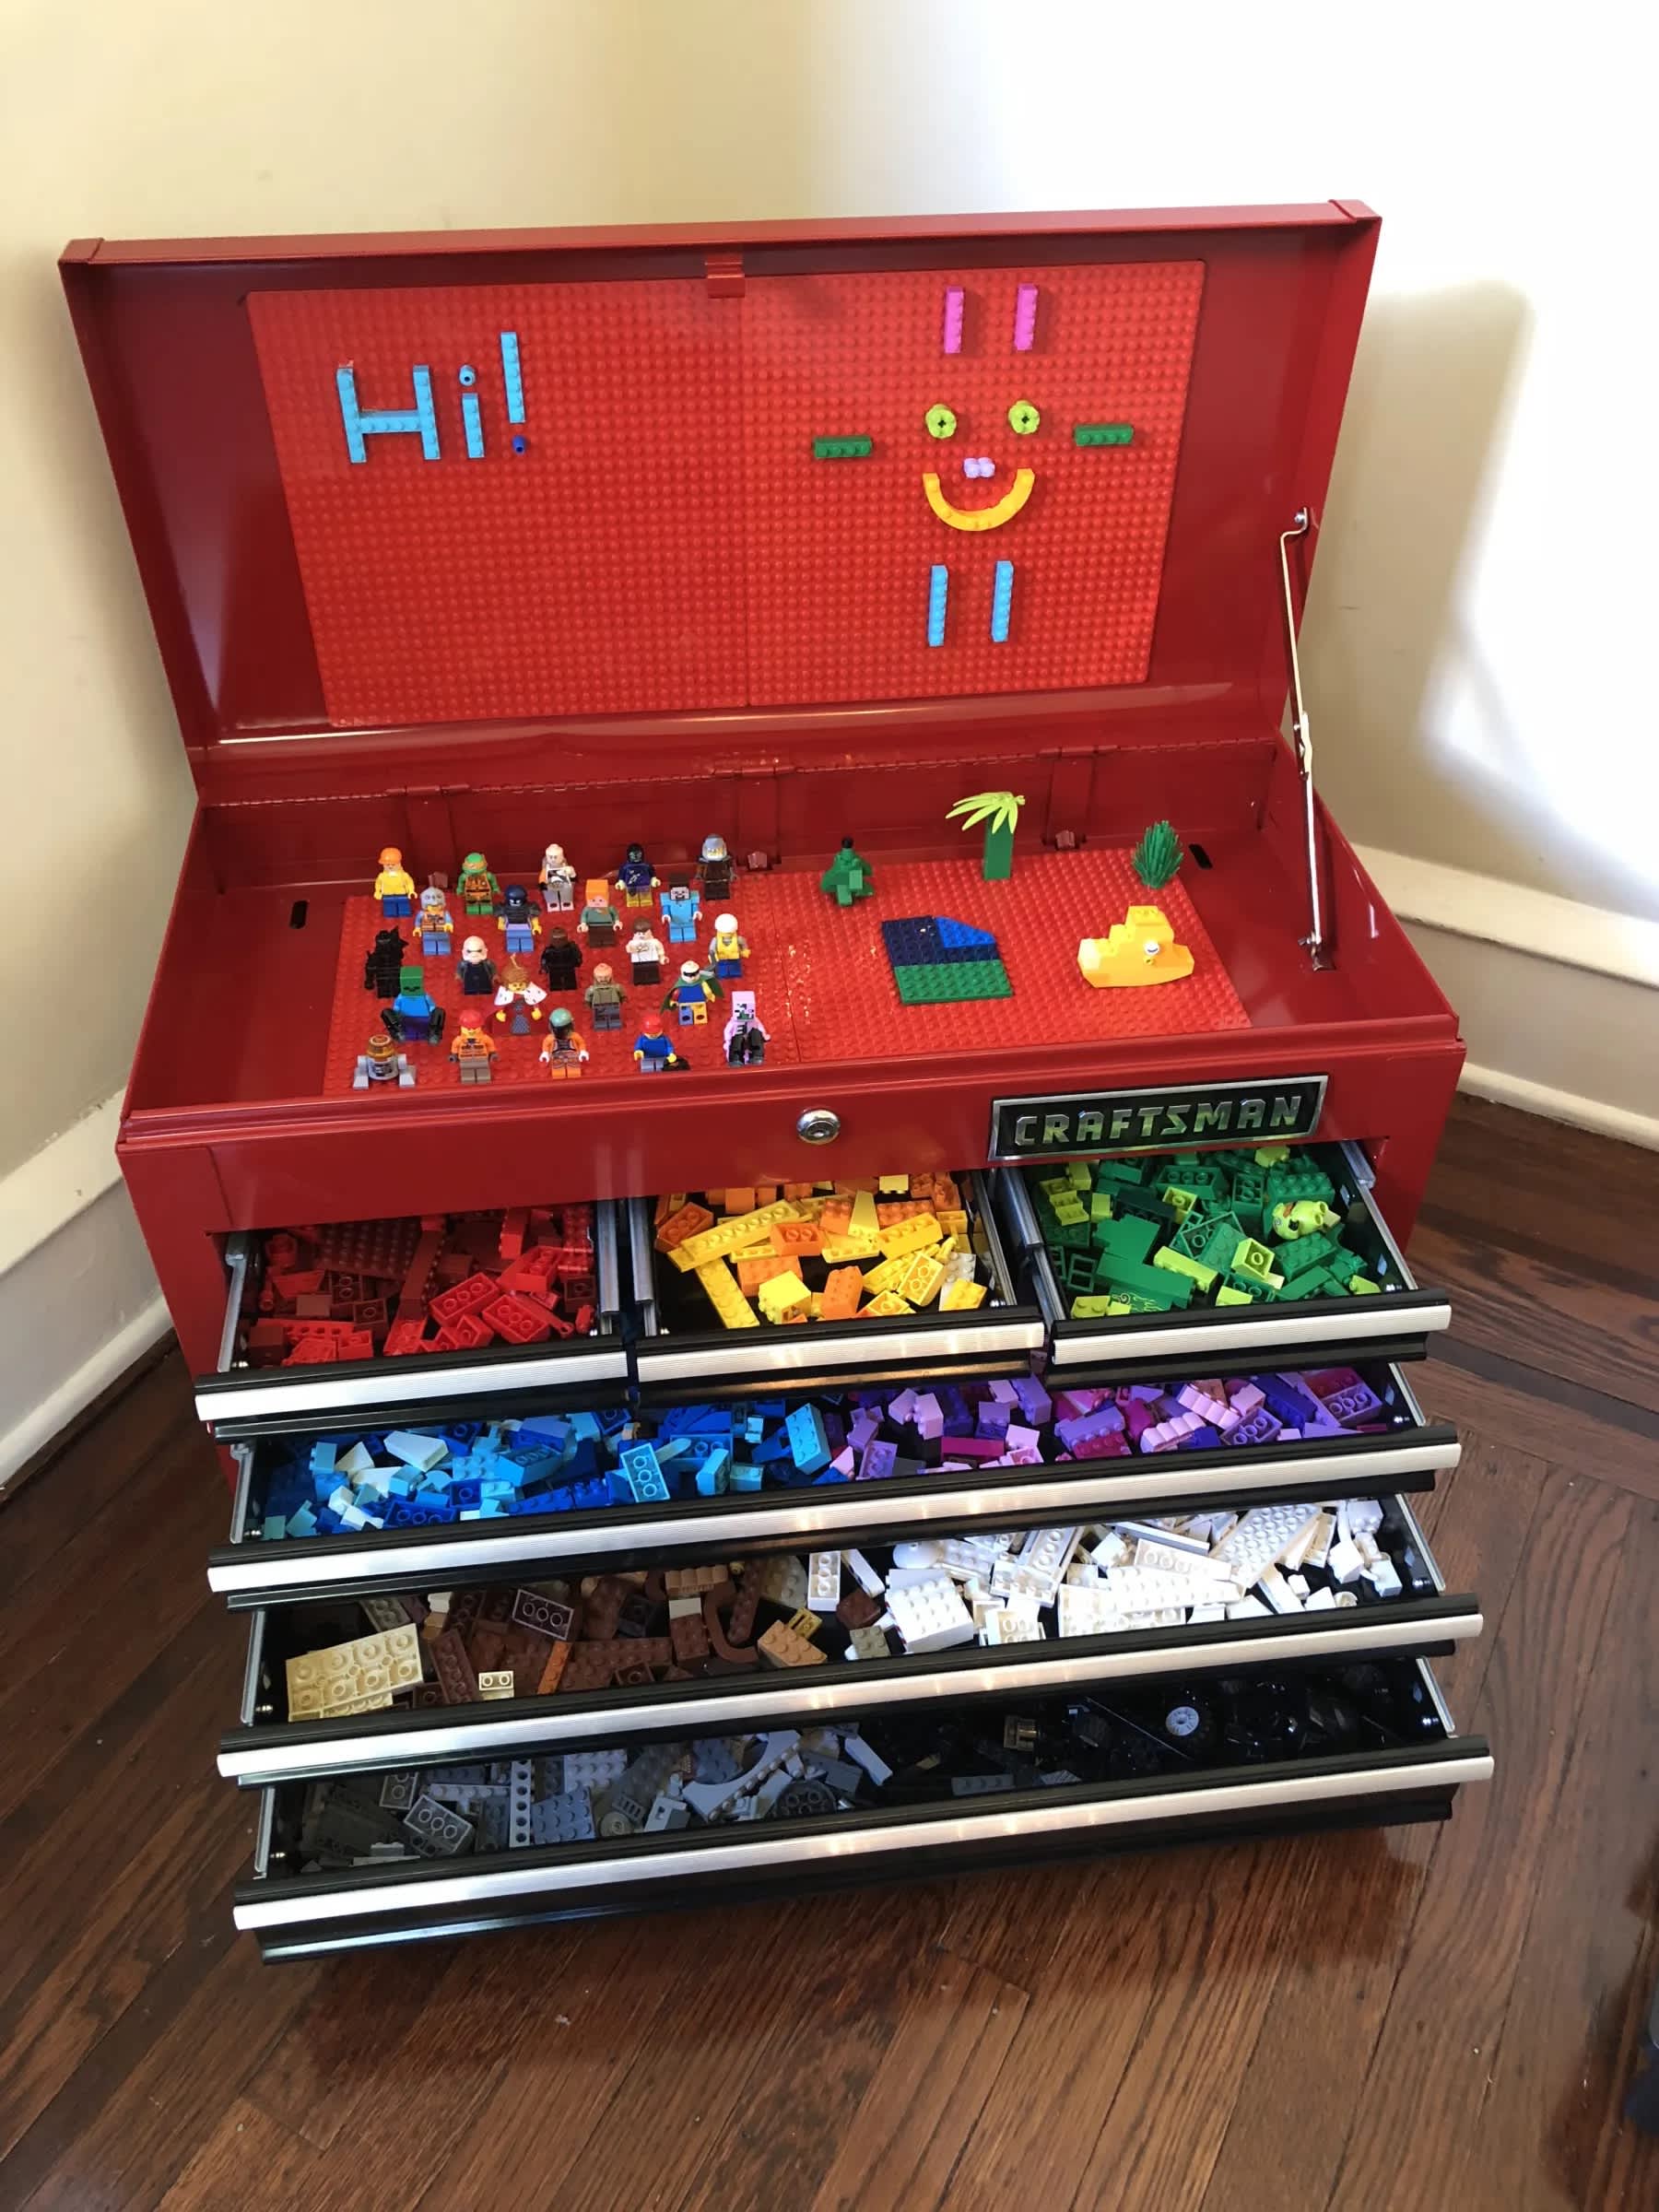 7 Good Ways (and 3 Bad Ways) to Organize Your Lego - Make